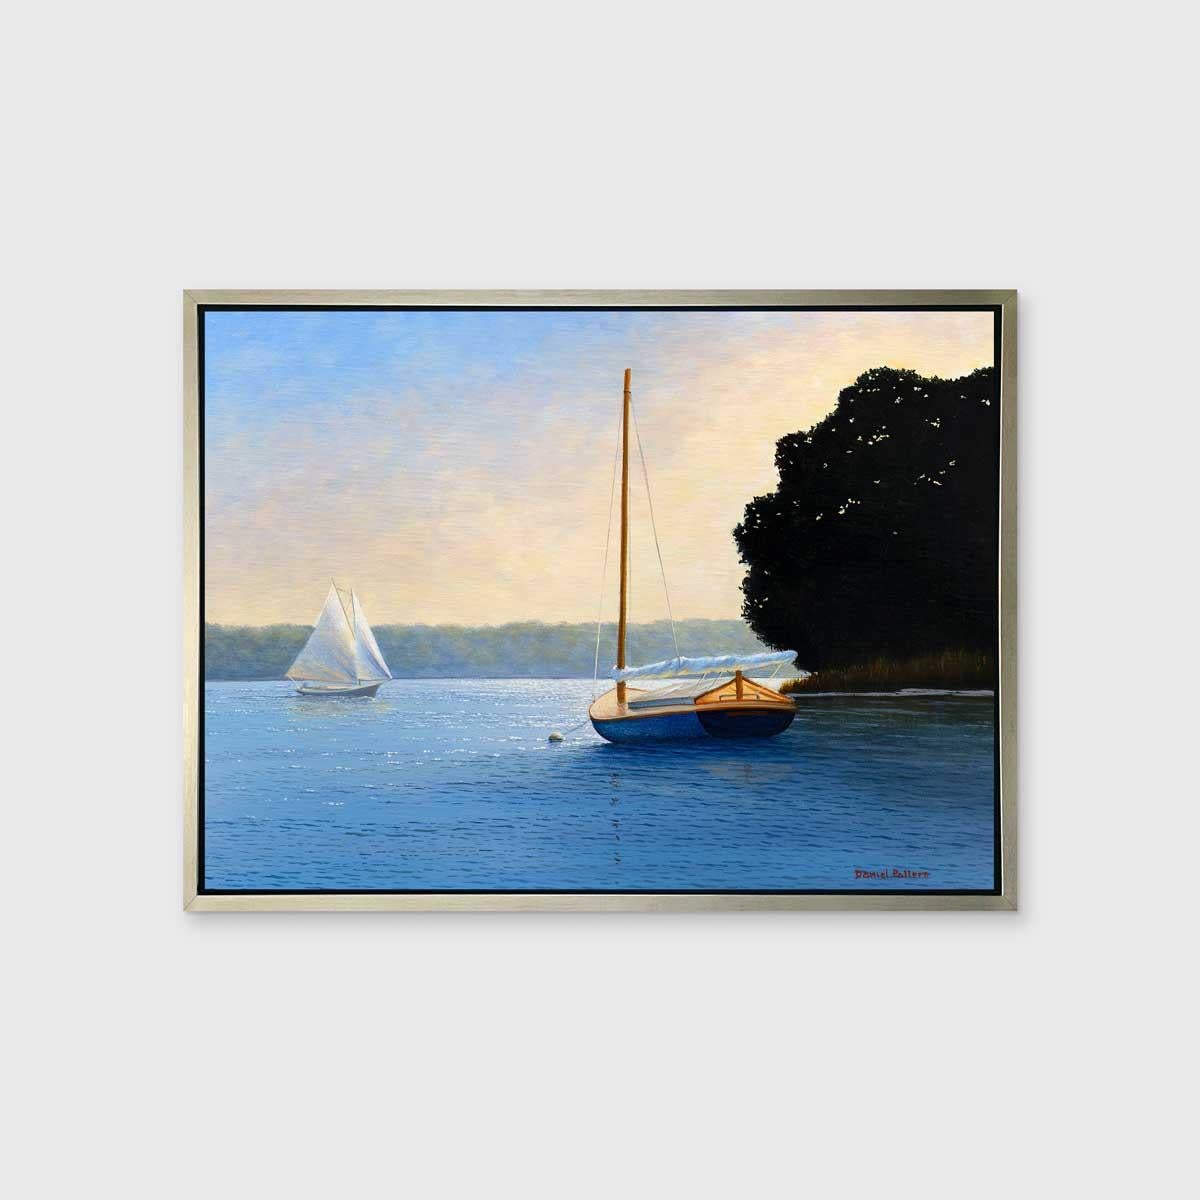 This traditional Limited Edition print by Daniel Pollera captures a coastal scene. A sailboat with its sail down sits in the shadow of dark trees, and looks out toward another white sailboat that is passing by. Above the green foliage that lines the